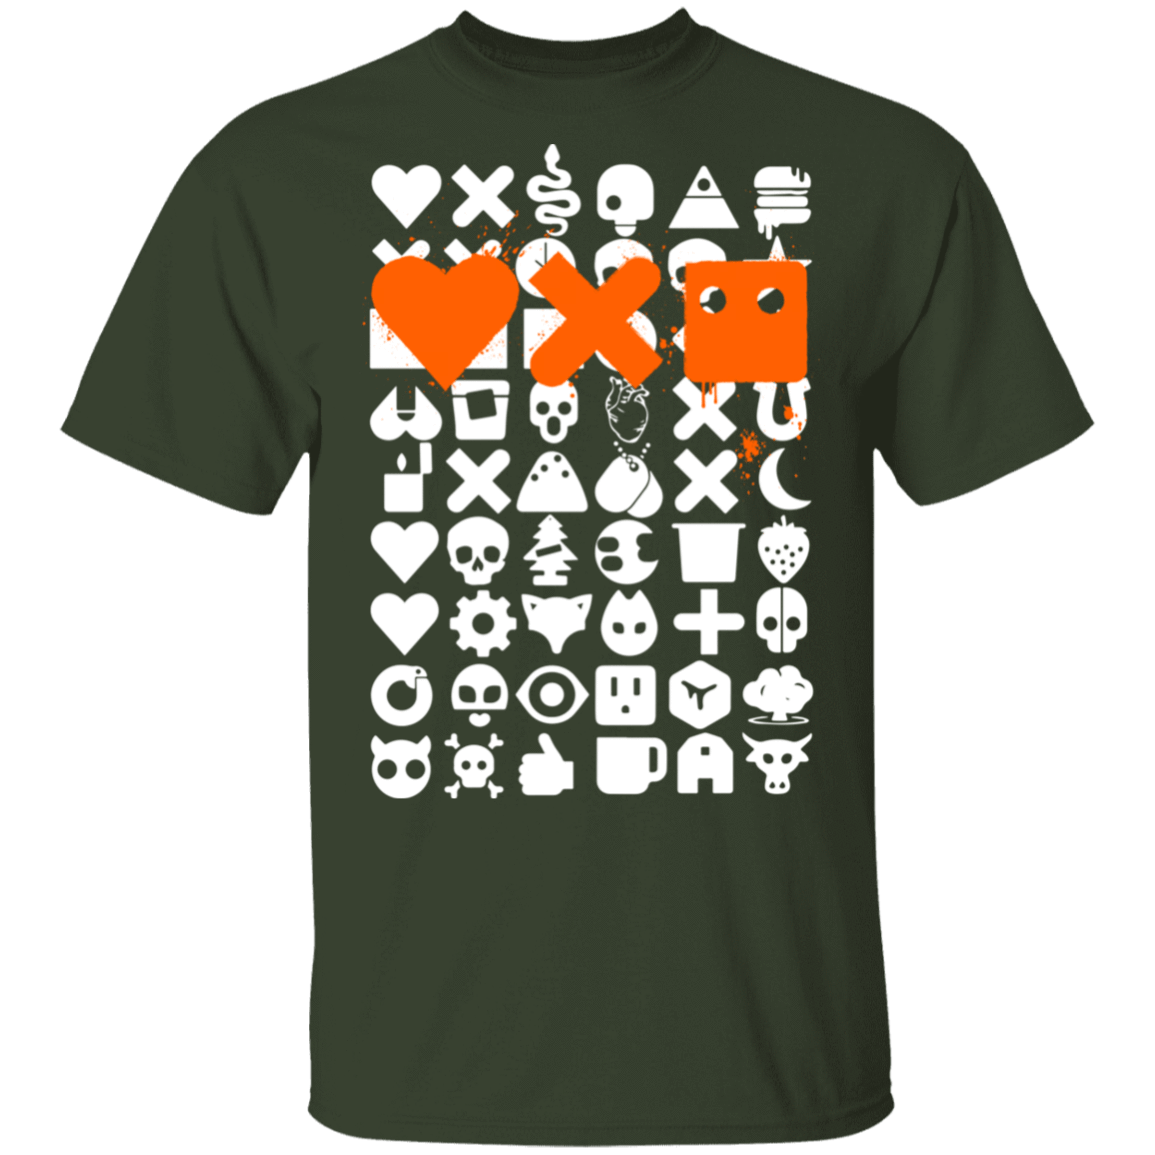 T-Shirts Forest / S Love Death and Robots T-Shirt